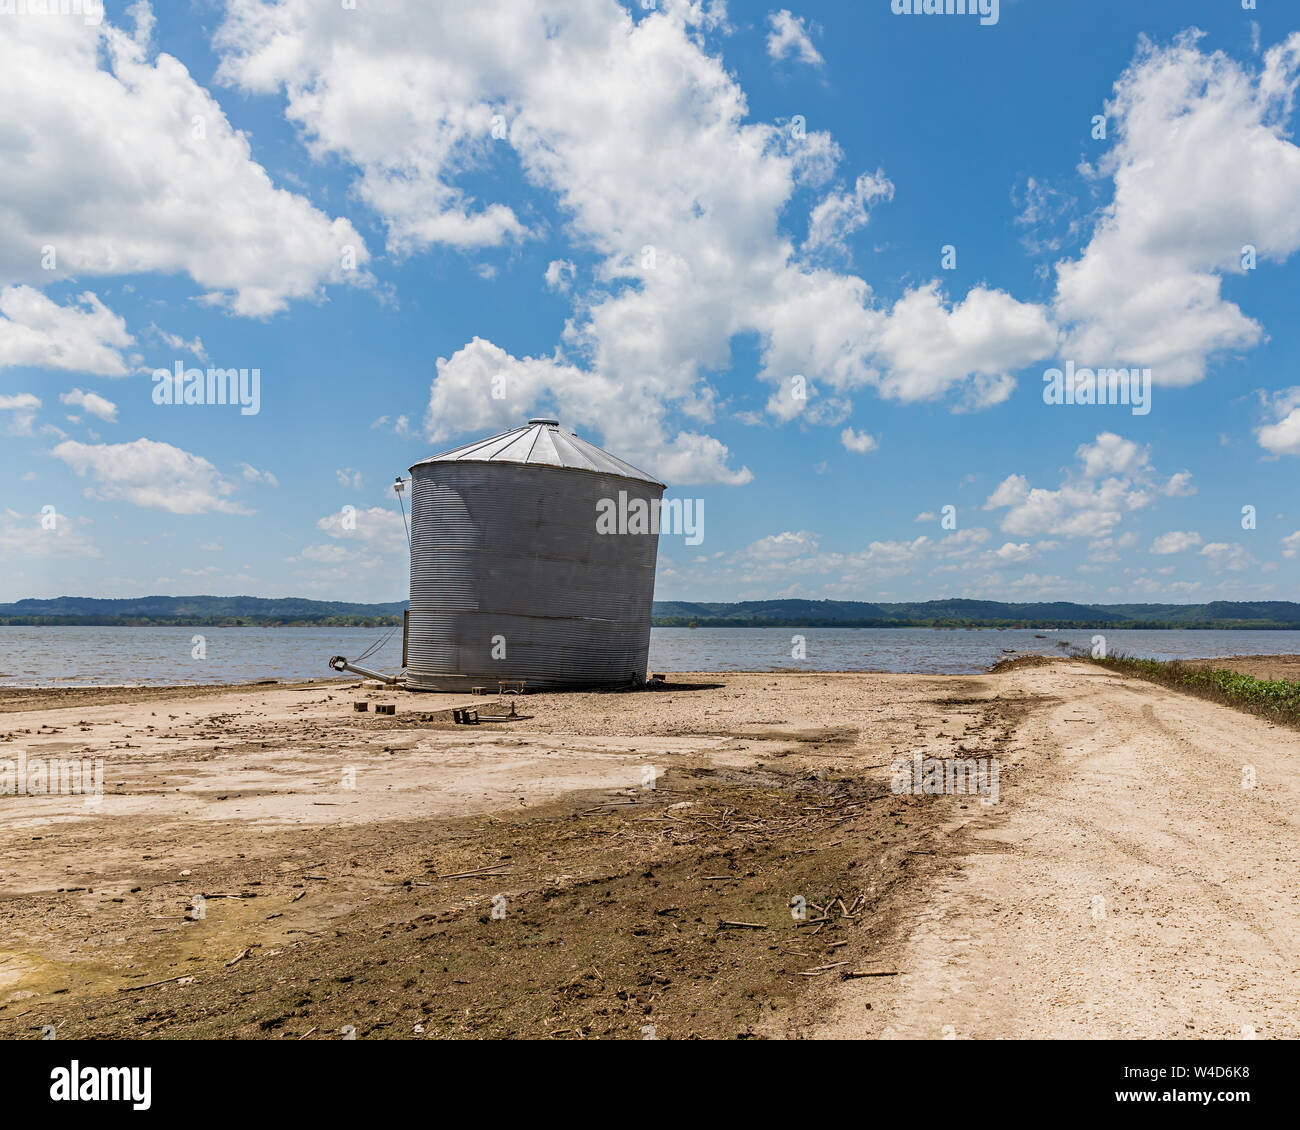 Mississippi River flooding has damaged farm building and grain bins, which is revealed as flood waters are receding Stock Photo